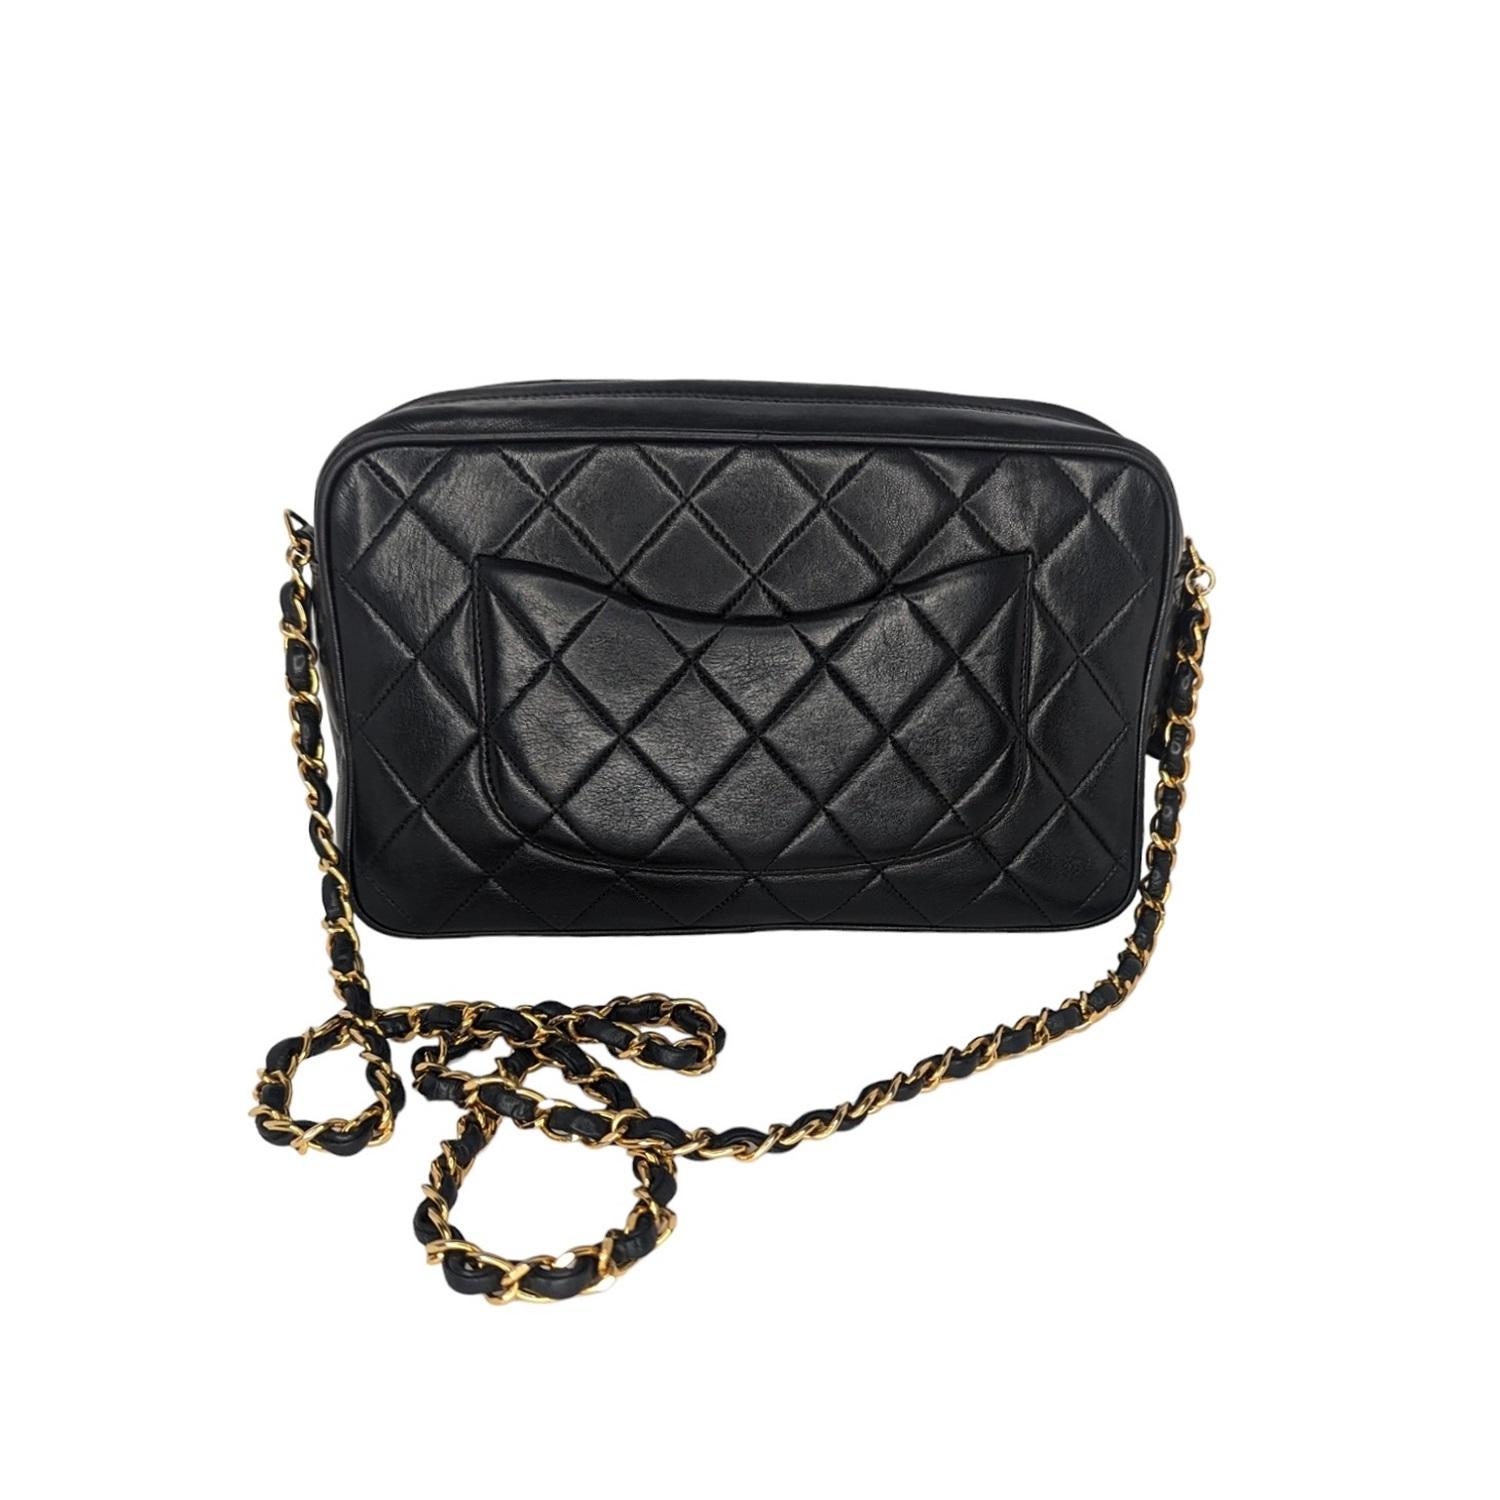 Chanel Vintage Lambskin Quilted Front Pocket Camera Bag In Good Condition For Sale In Scottsdale, AZ